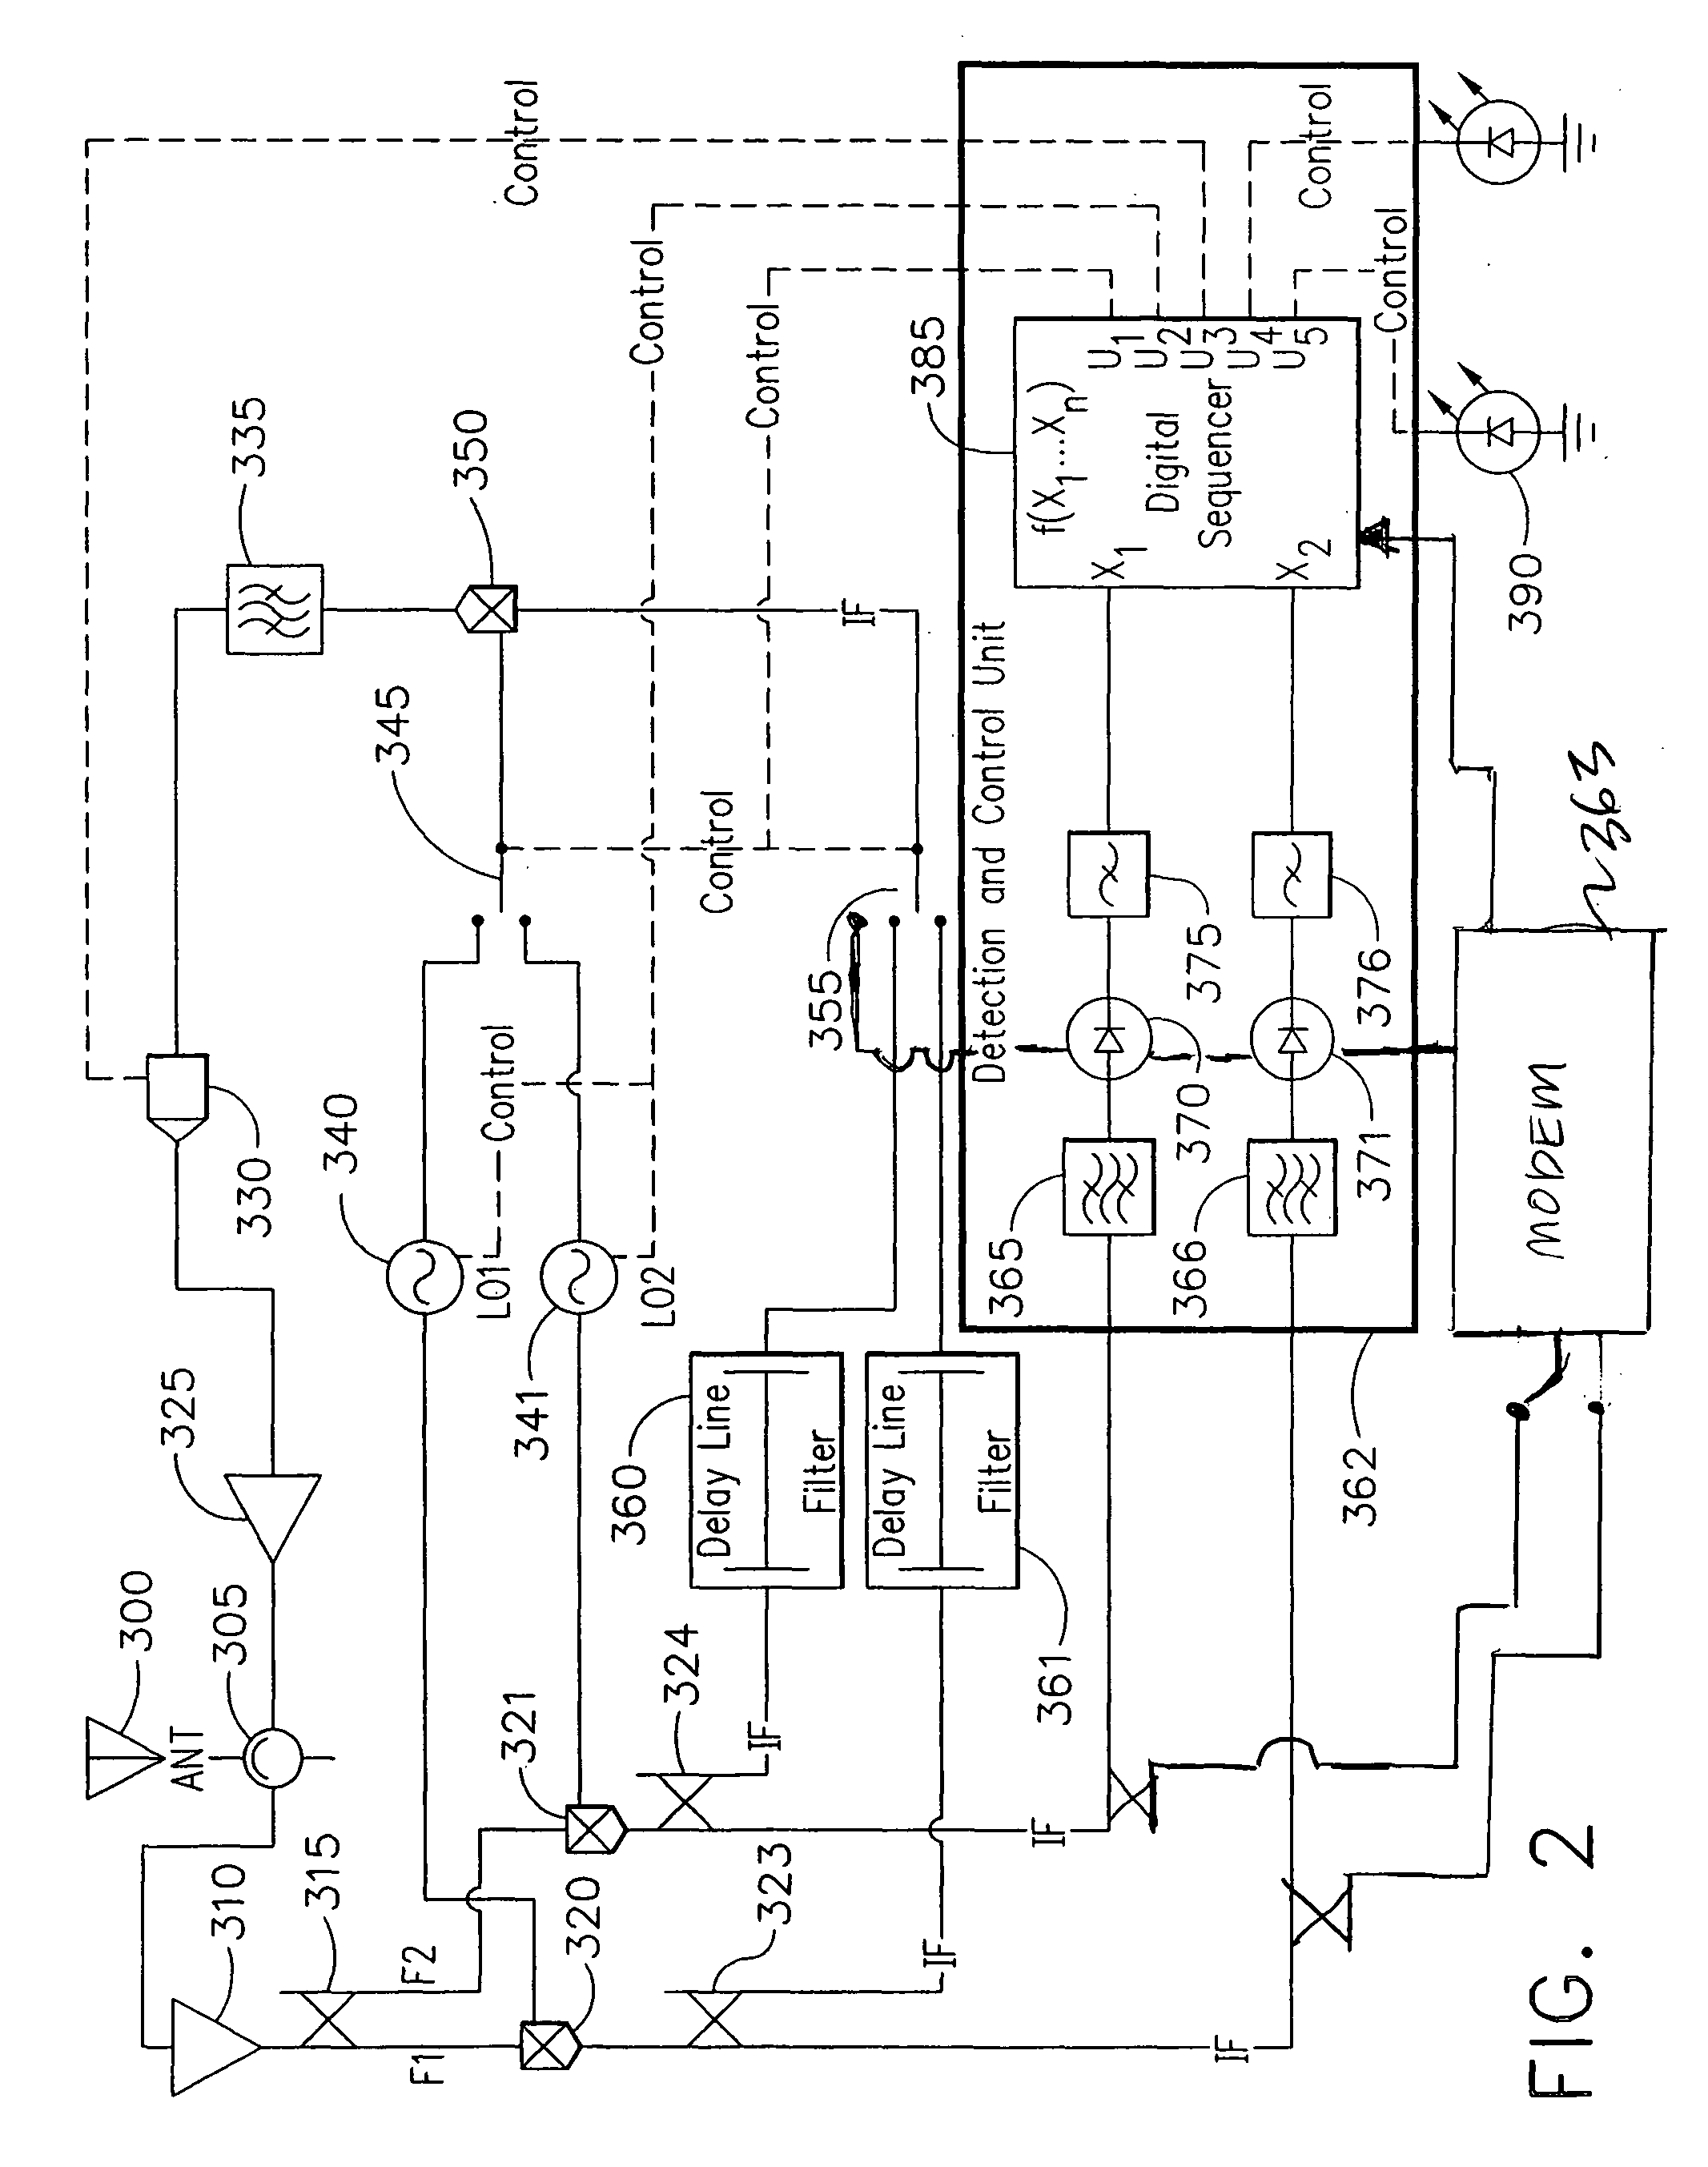 Physical layer repeater configuration for increasing MIMO performance